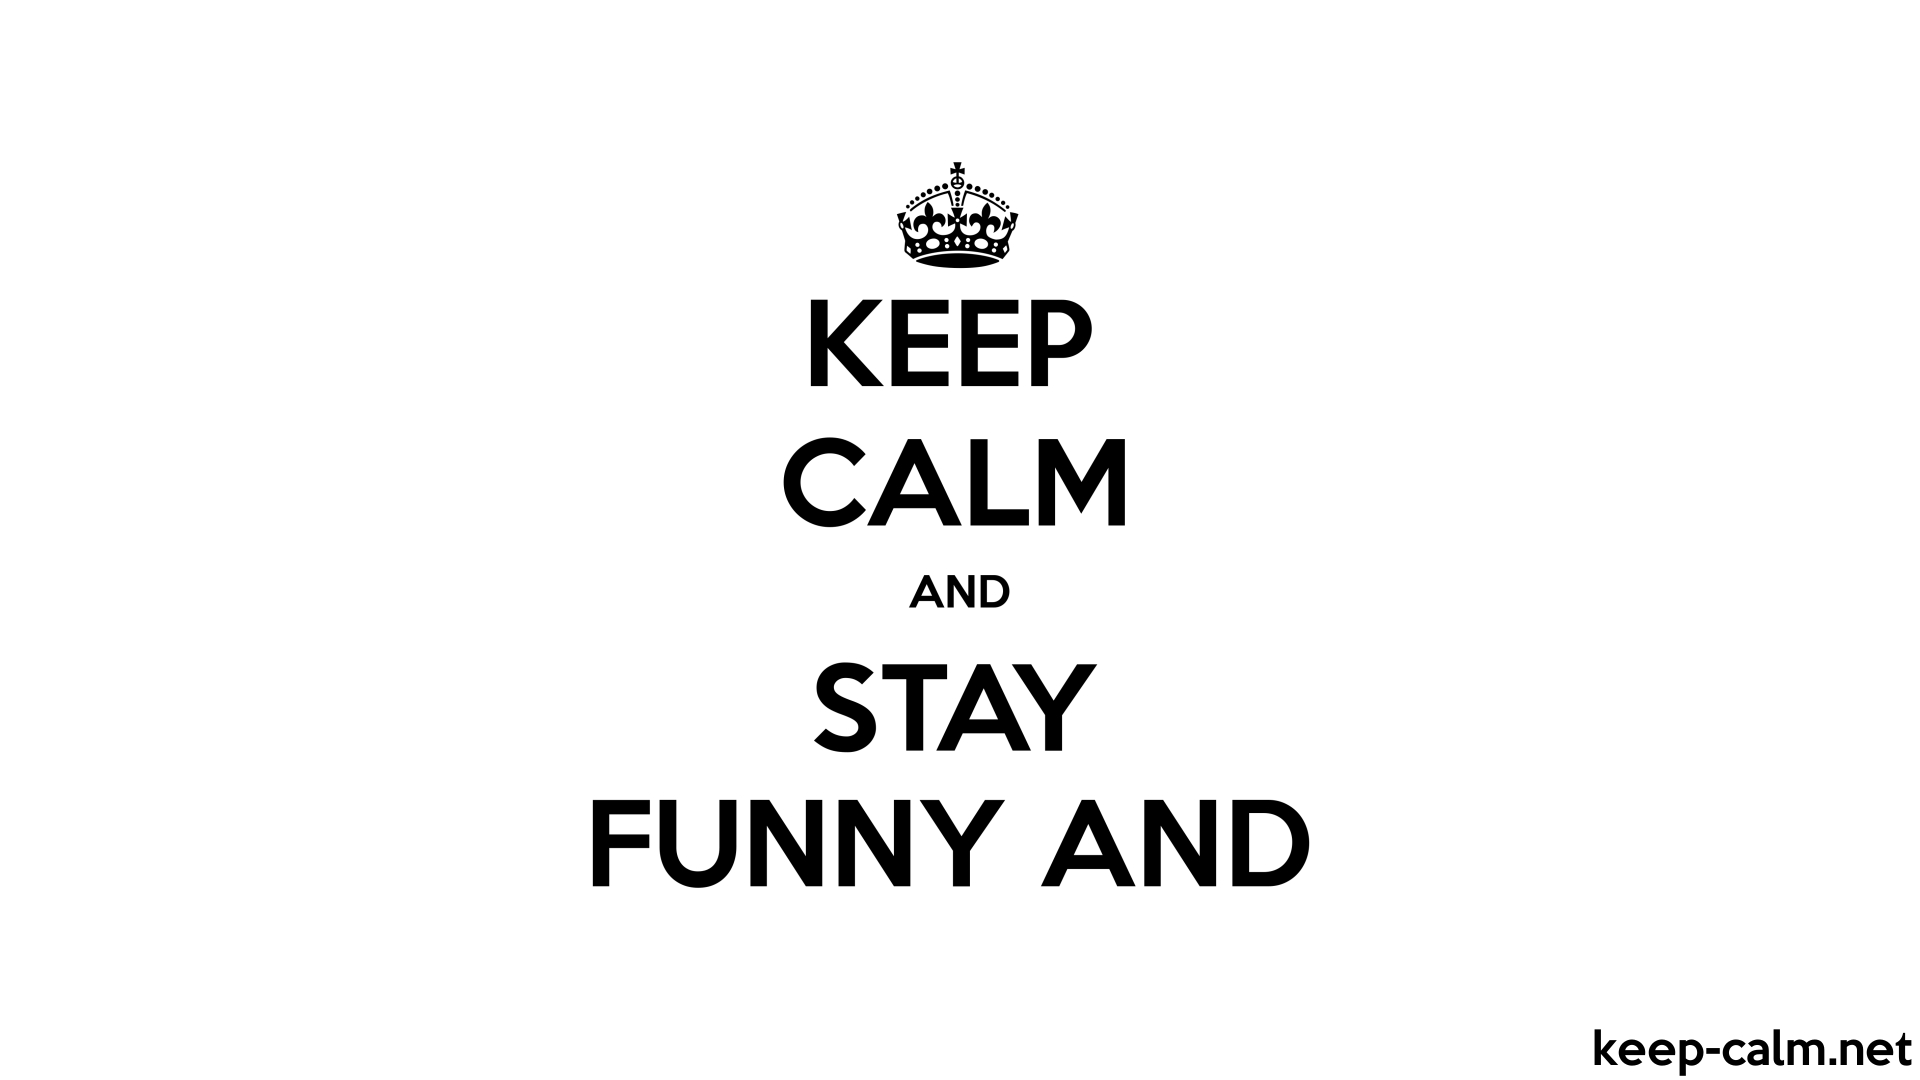 KEEP CALM AND STAY FUNNY AND